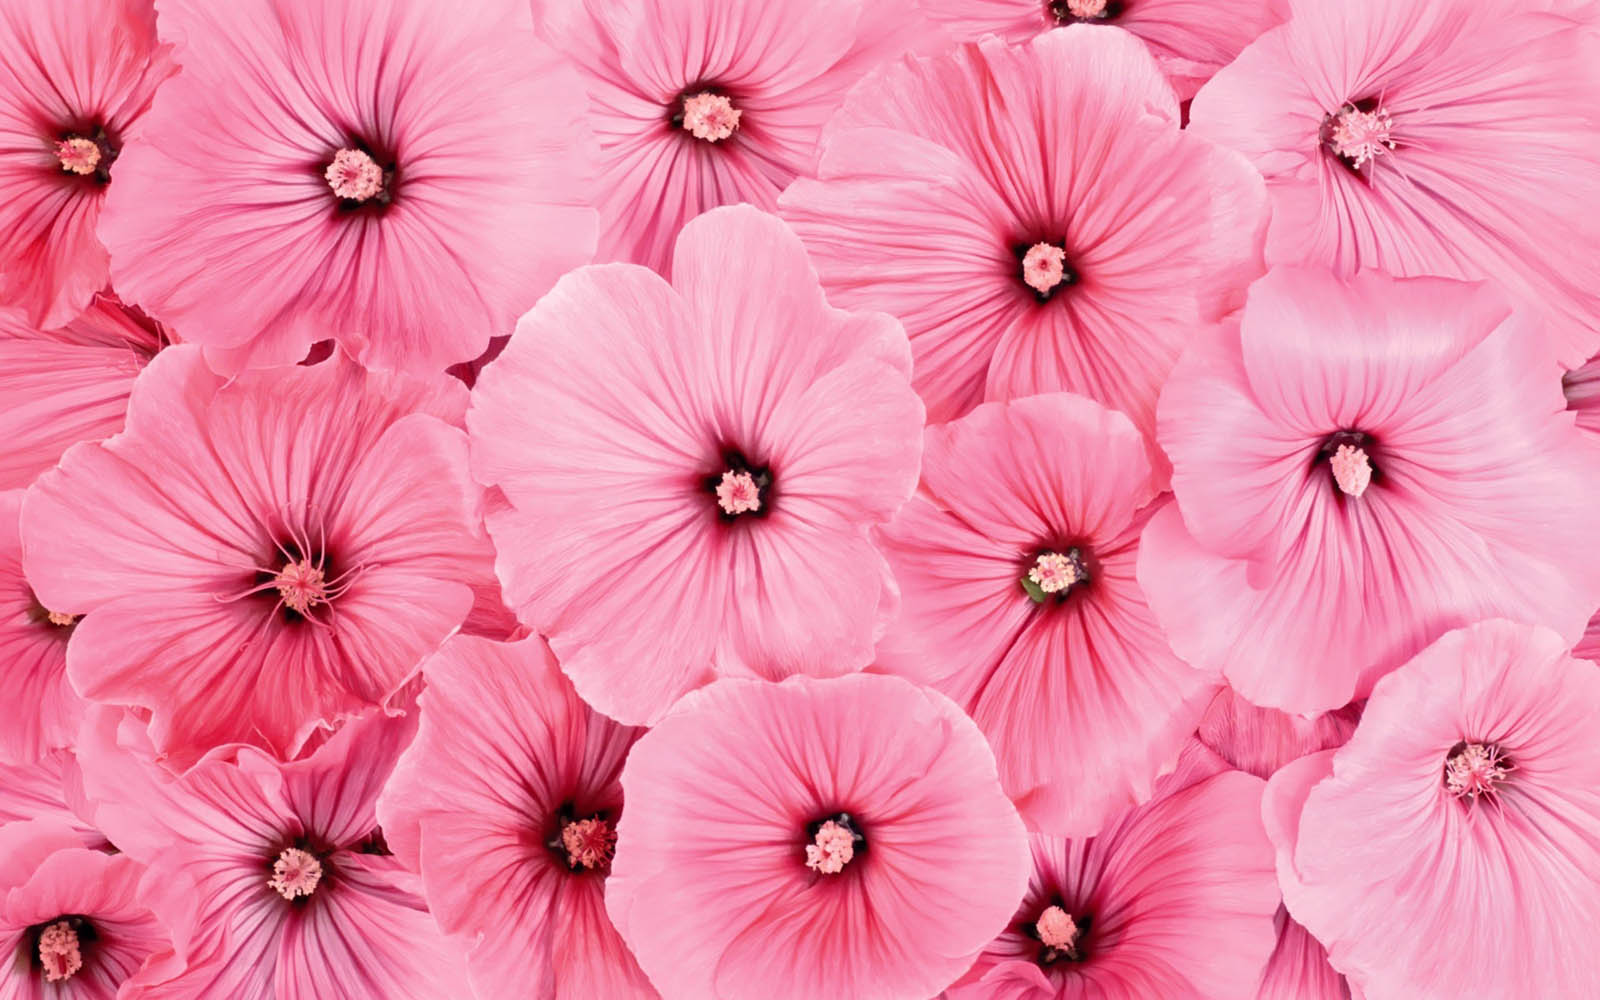  Wallpapers Pink Flowers Desktop Backgrounds Pink Flowers PhotosPink 1600x1000